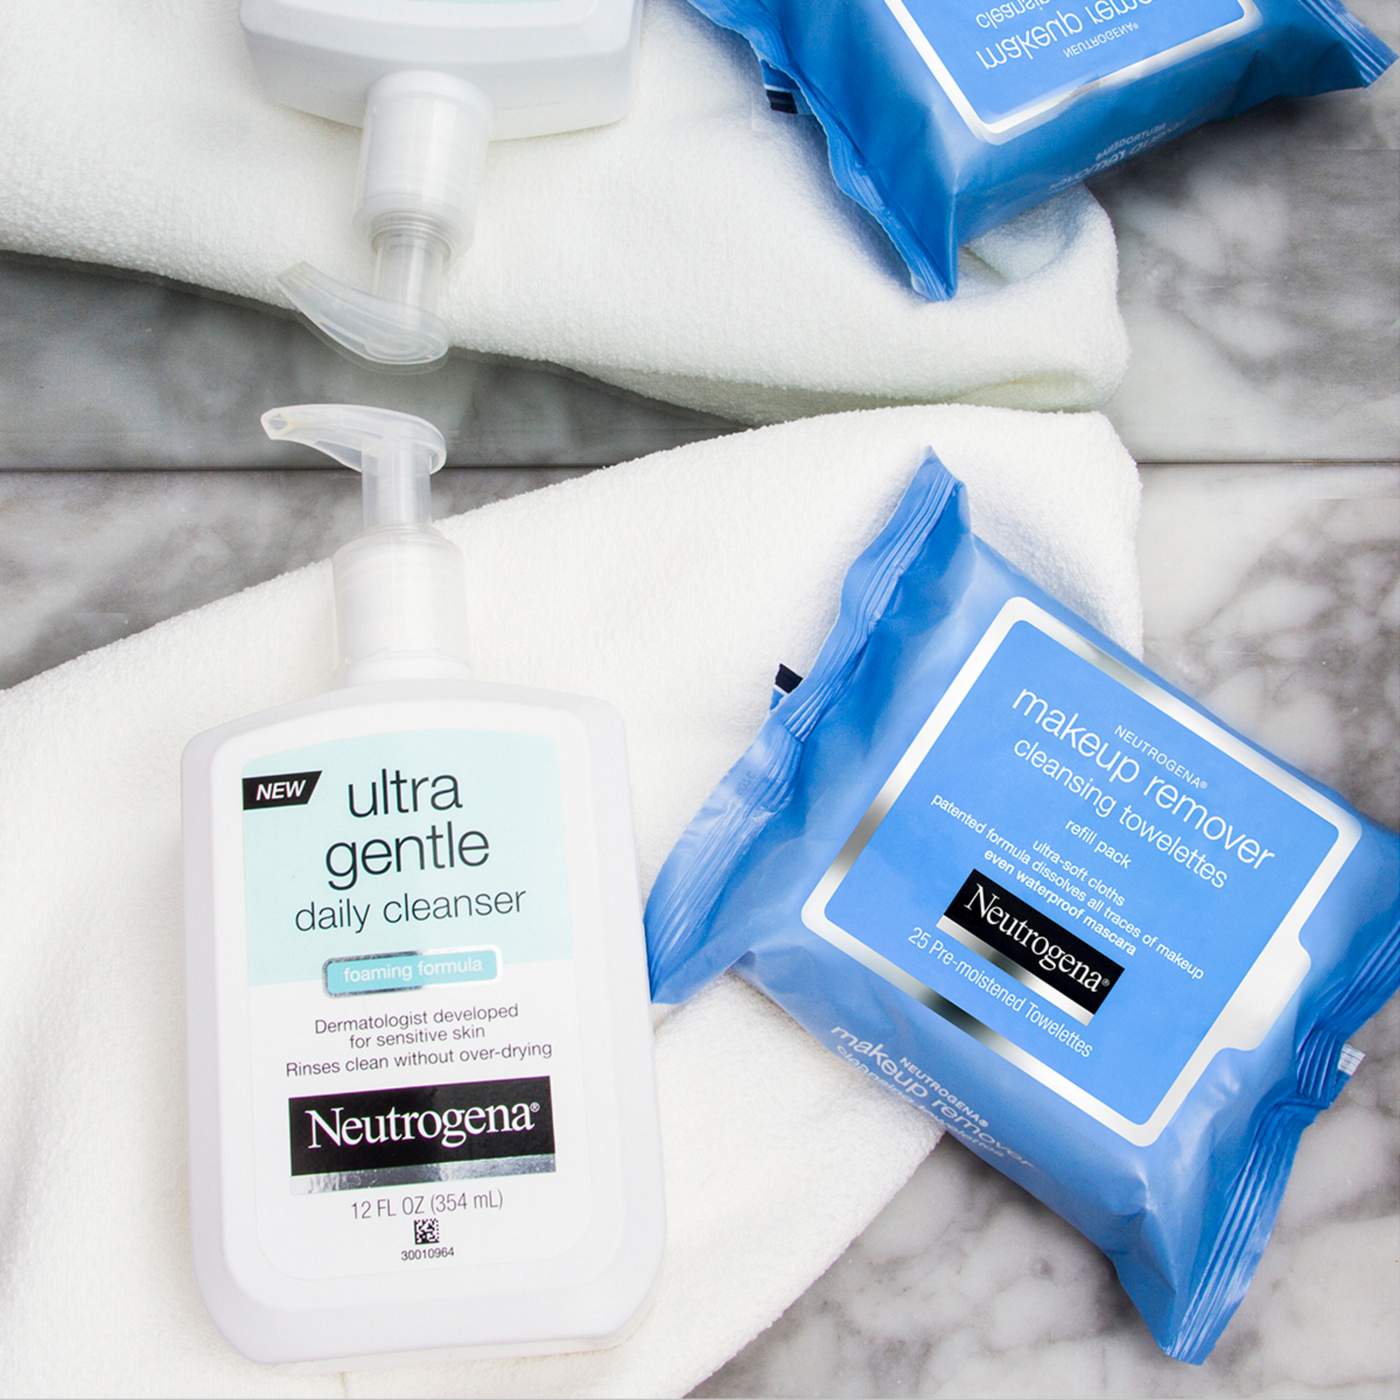 Neutrogena Makeup Remover Cleansing Towelettes; image 3 of 8